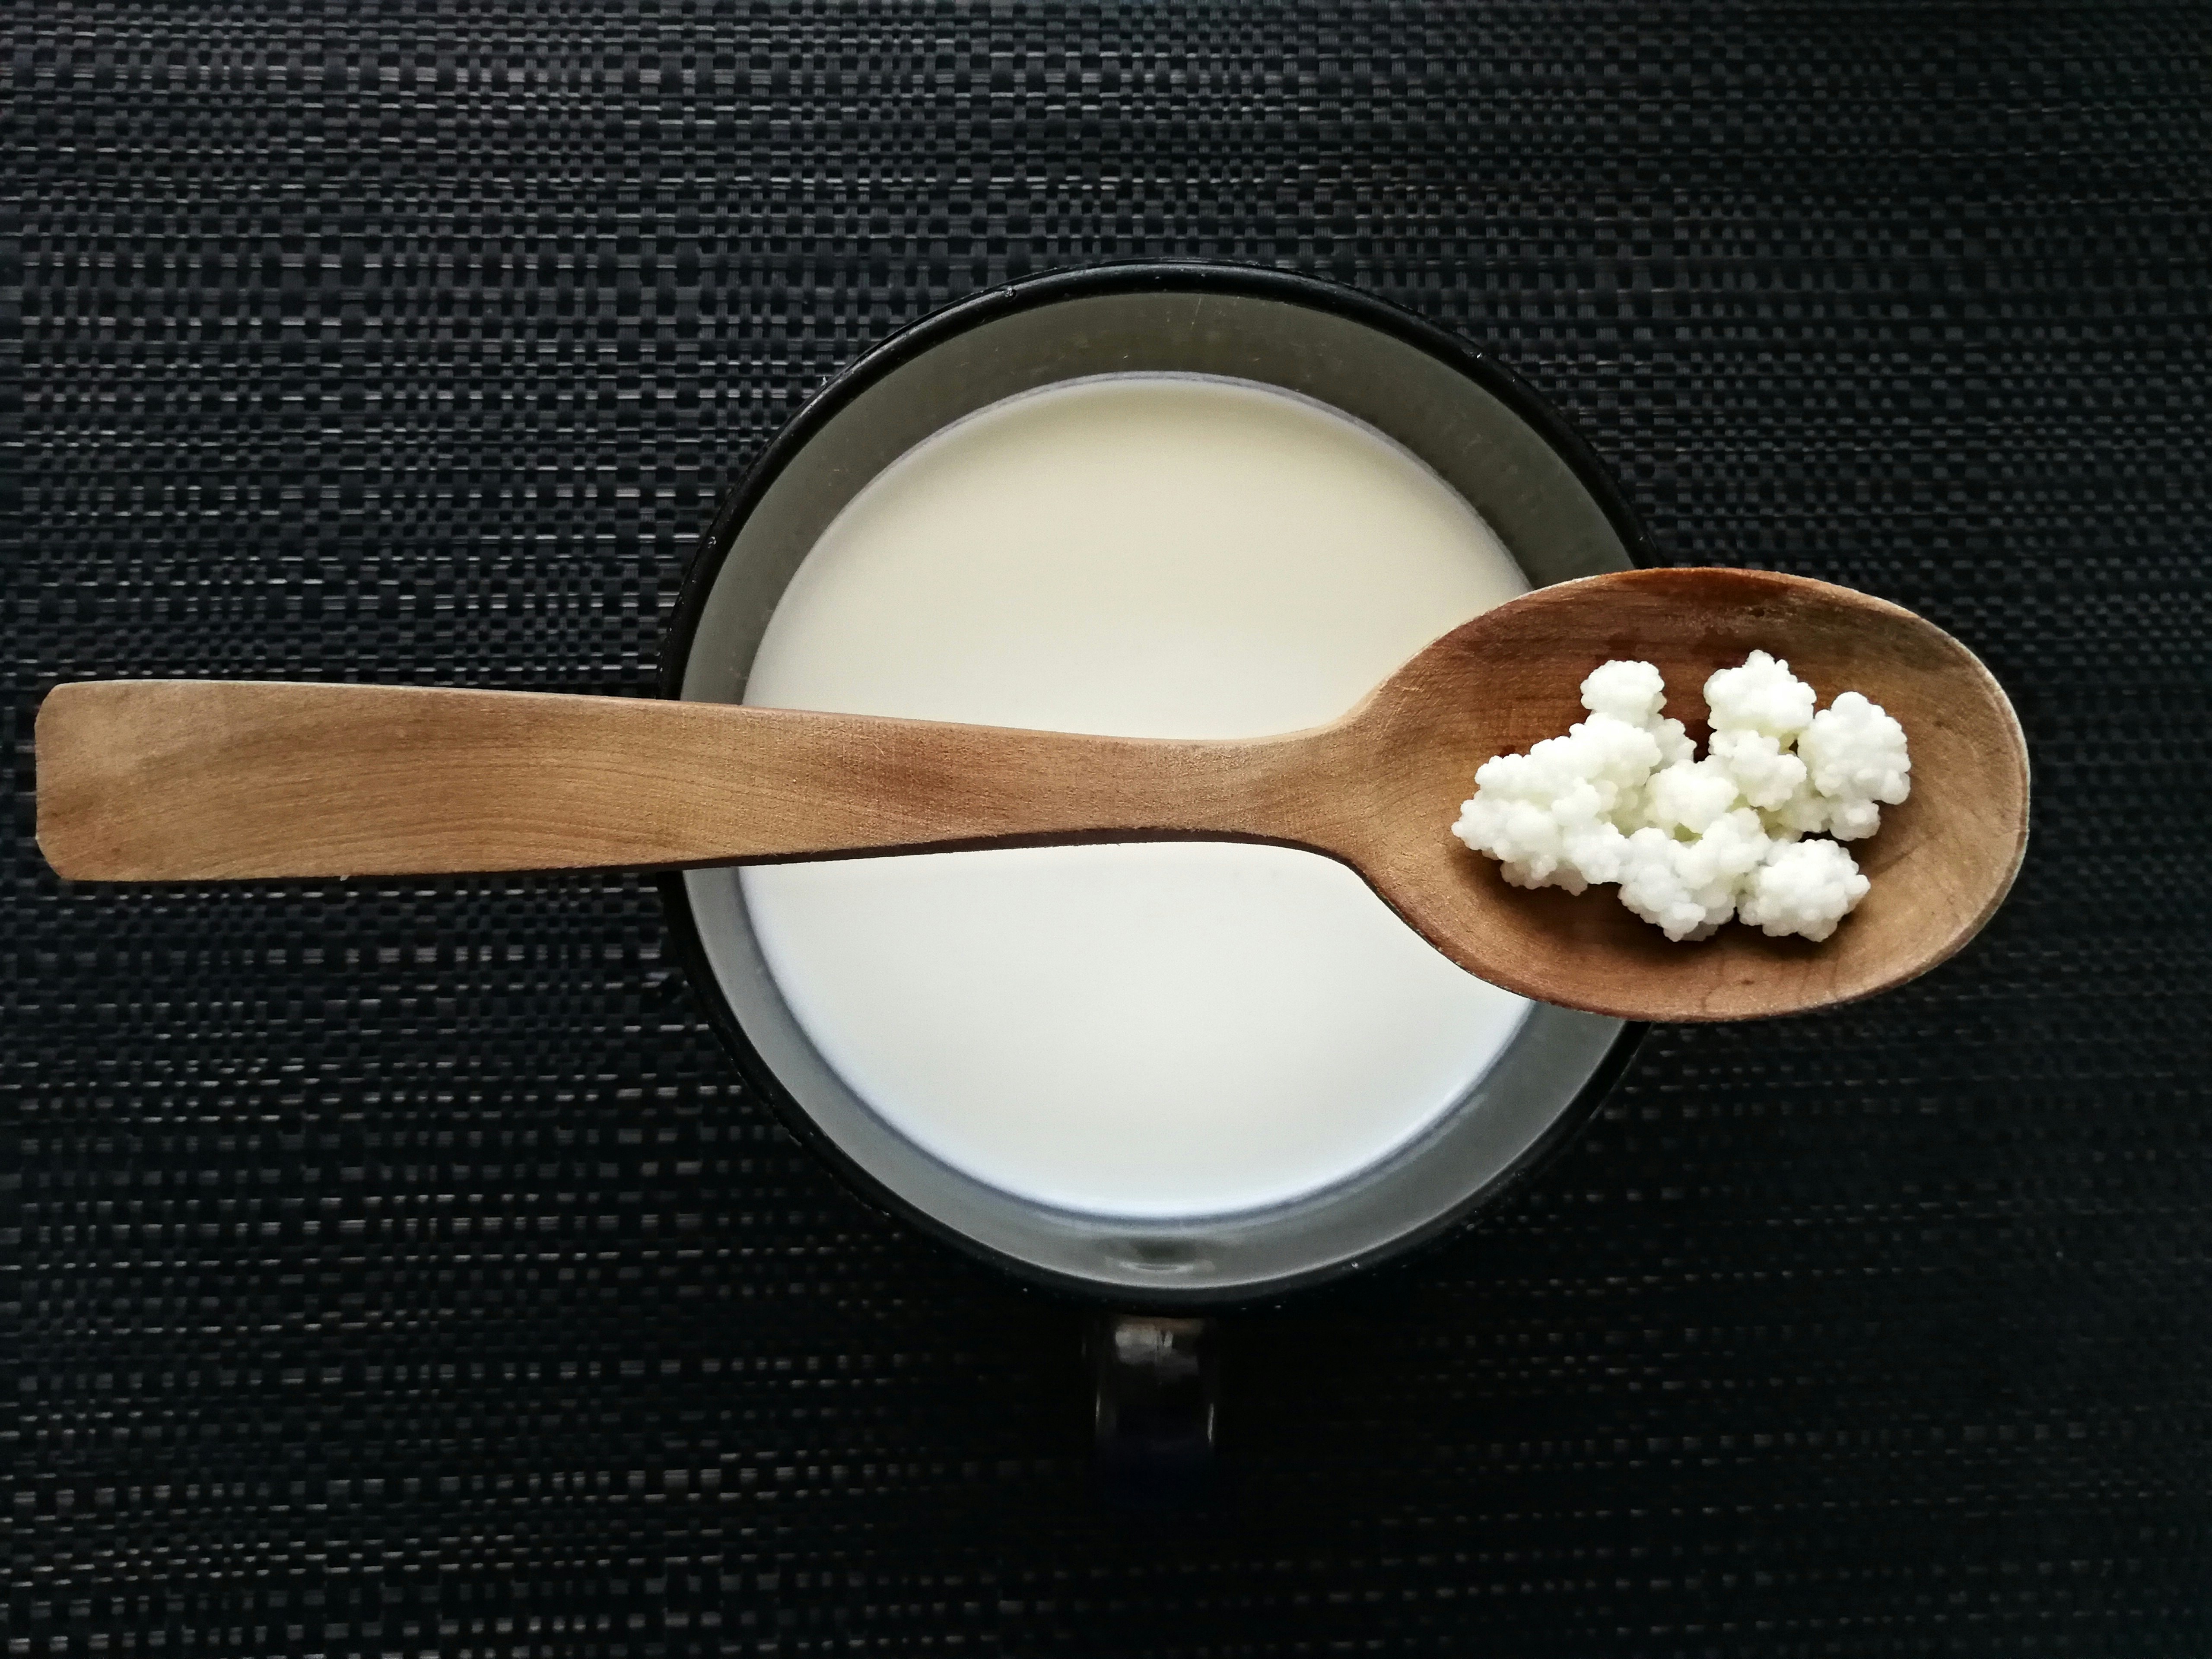 Kefir: What It Is, Benefits, and Risks